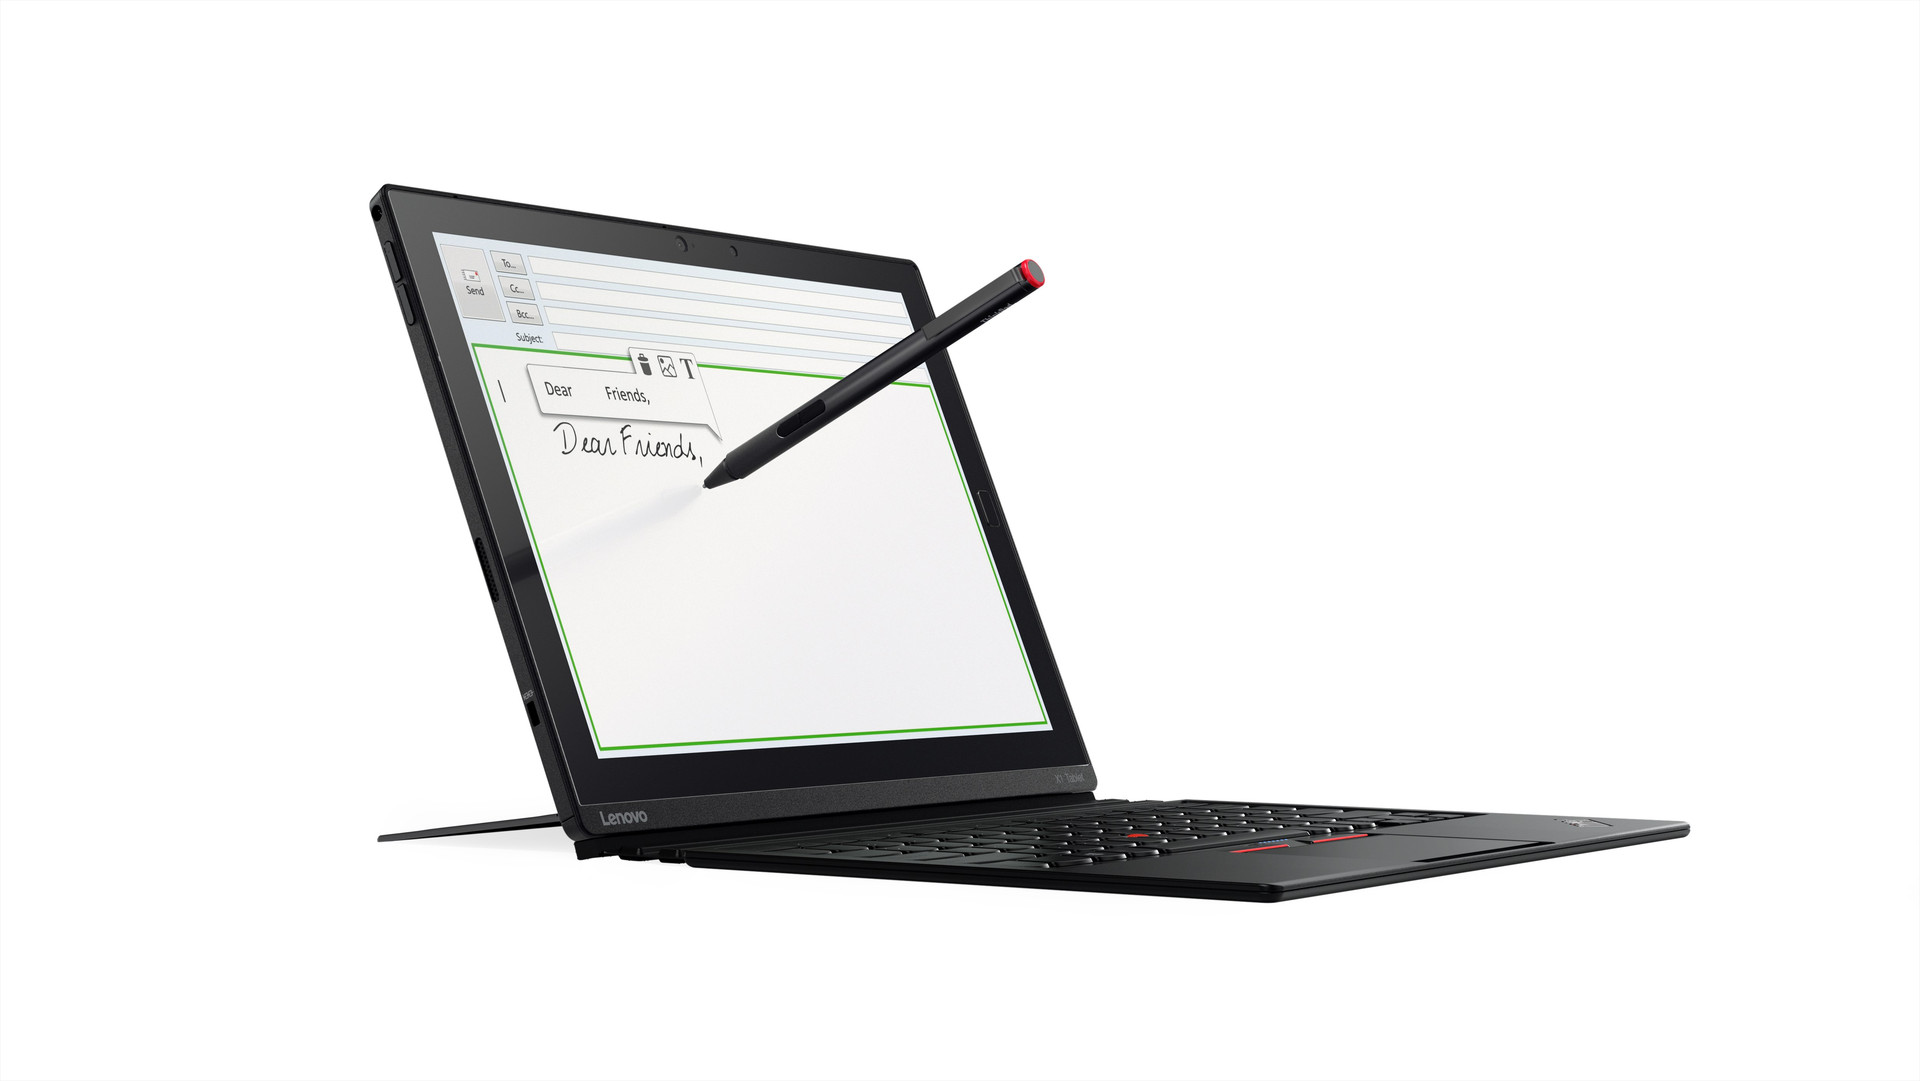 Lenovo announces ThinkPad X1 Carbon, Yoga and Tablet - NotebookCheck